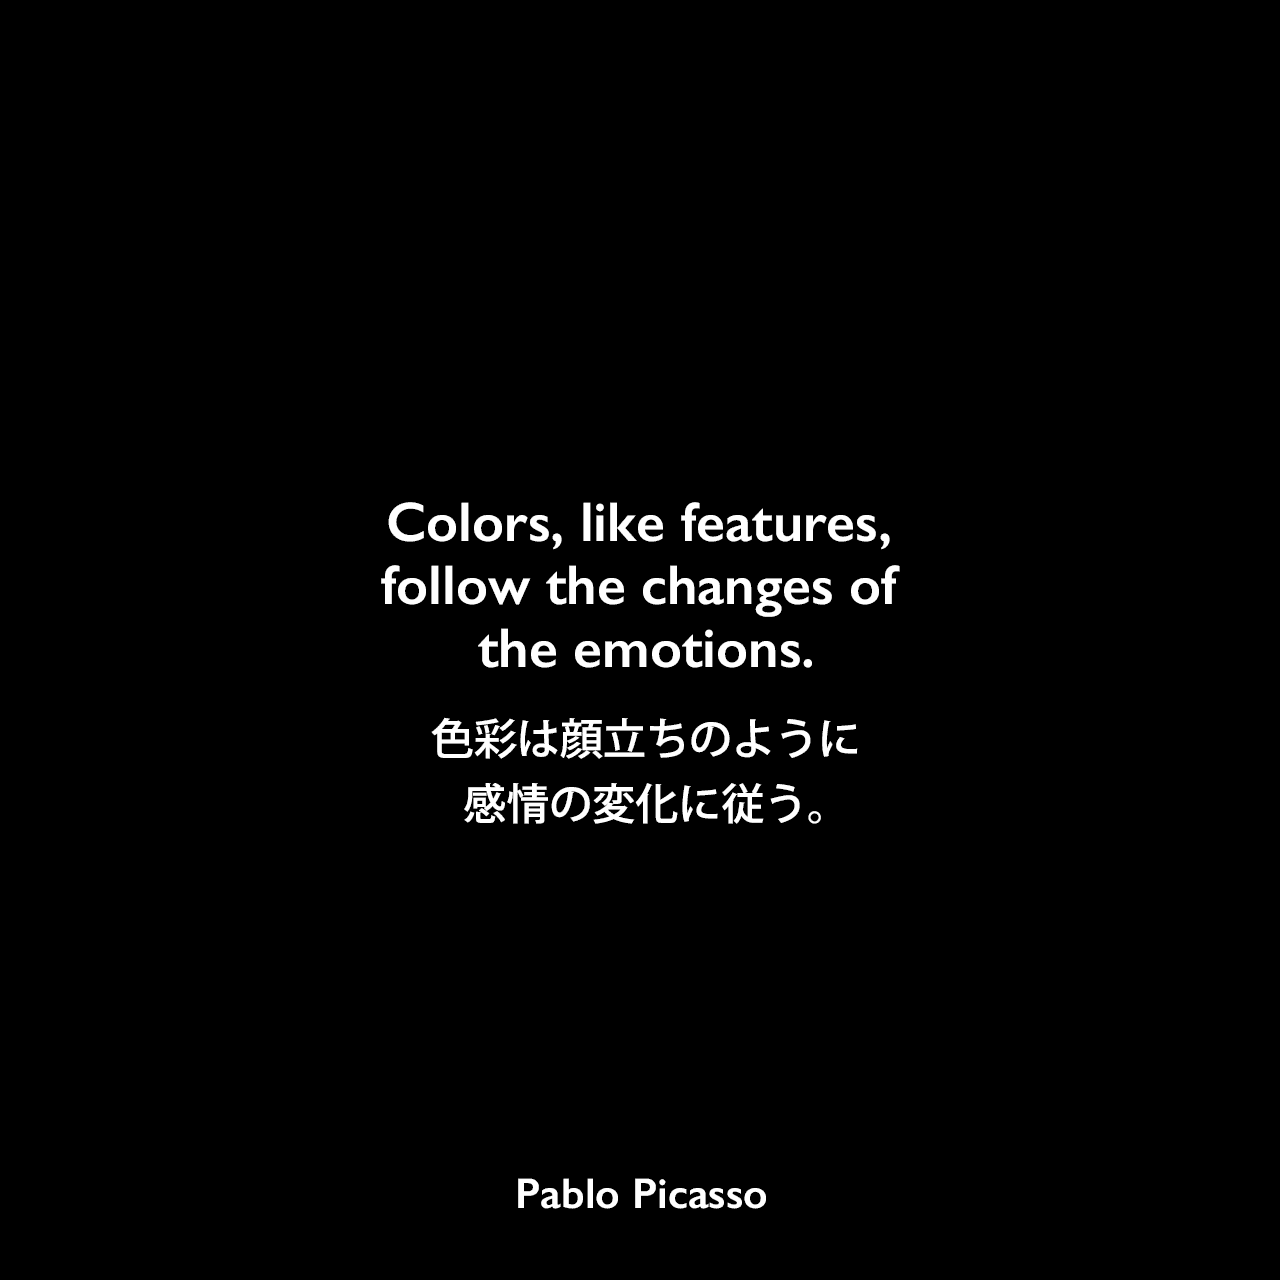 Colors, like features, follow the changes of the emotions.色彩は顔立ちのように、感情の変化に従う。Pablo Picasso